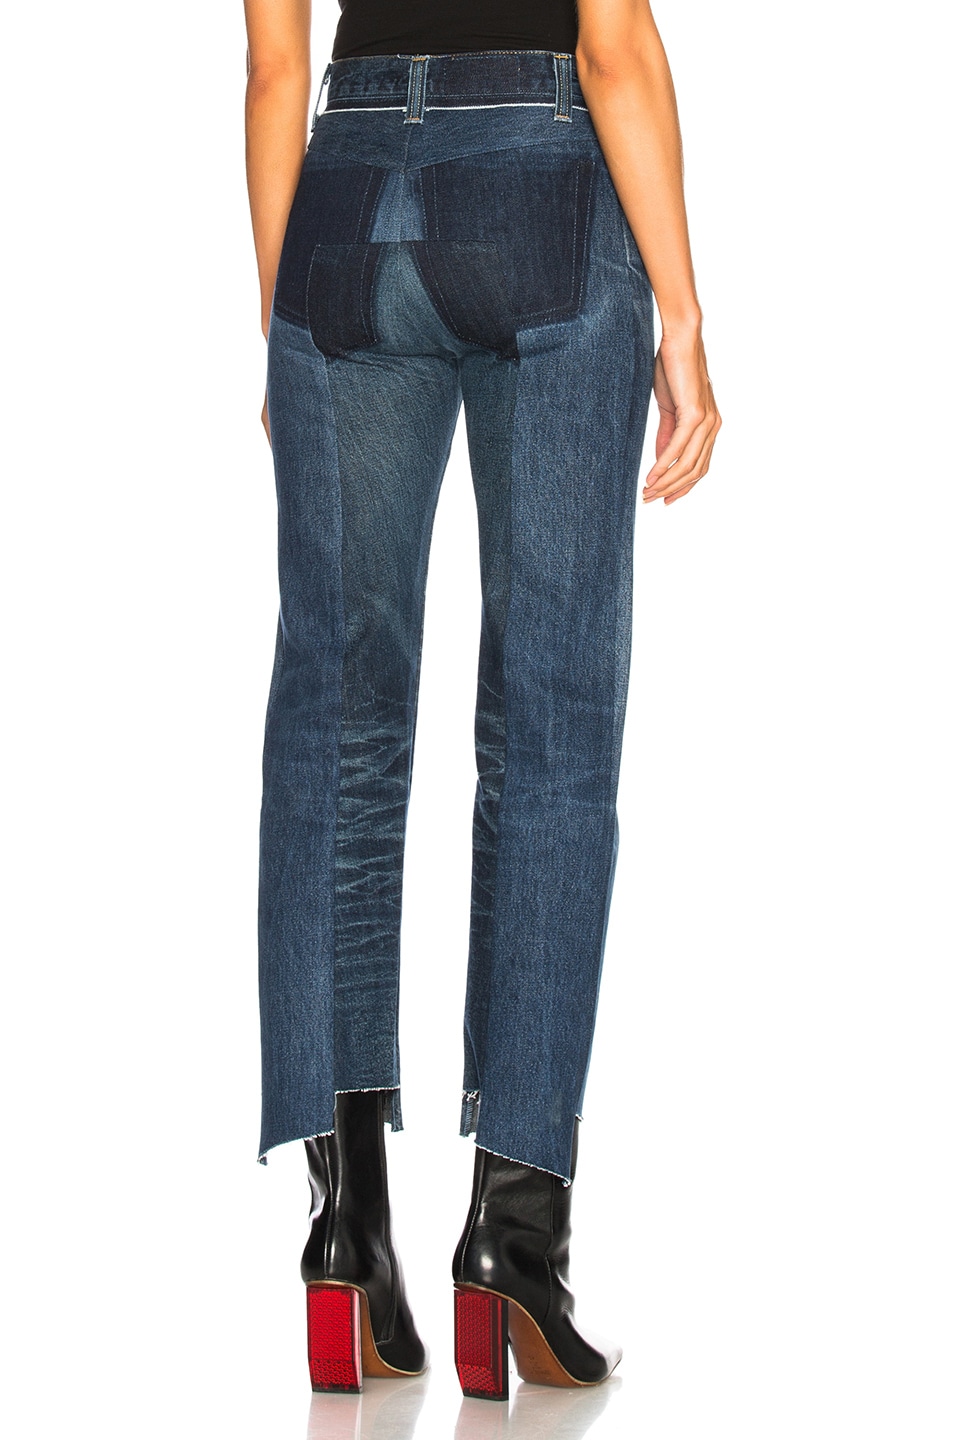 VETEMENTS Reworked Push Up Jeans in Blue | FWRD